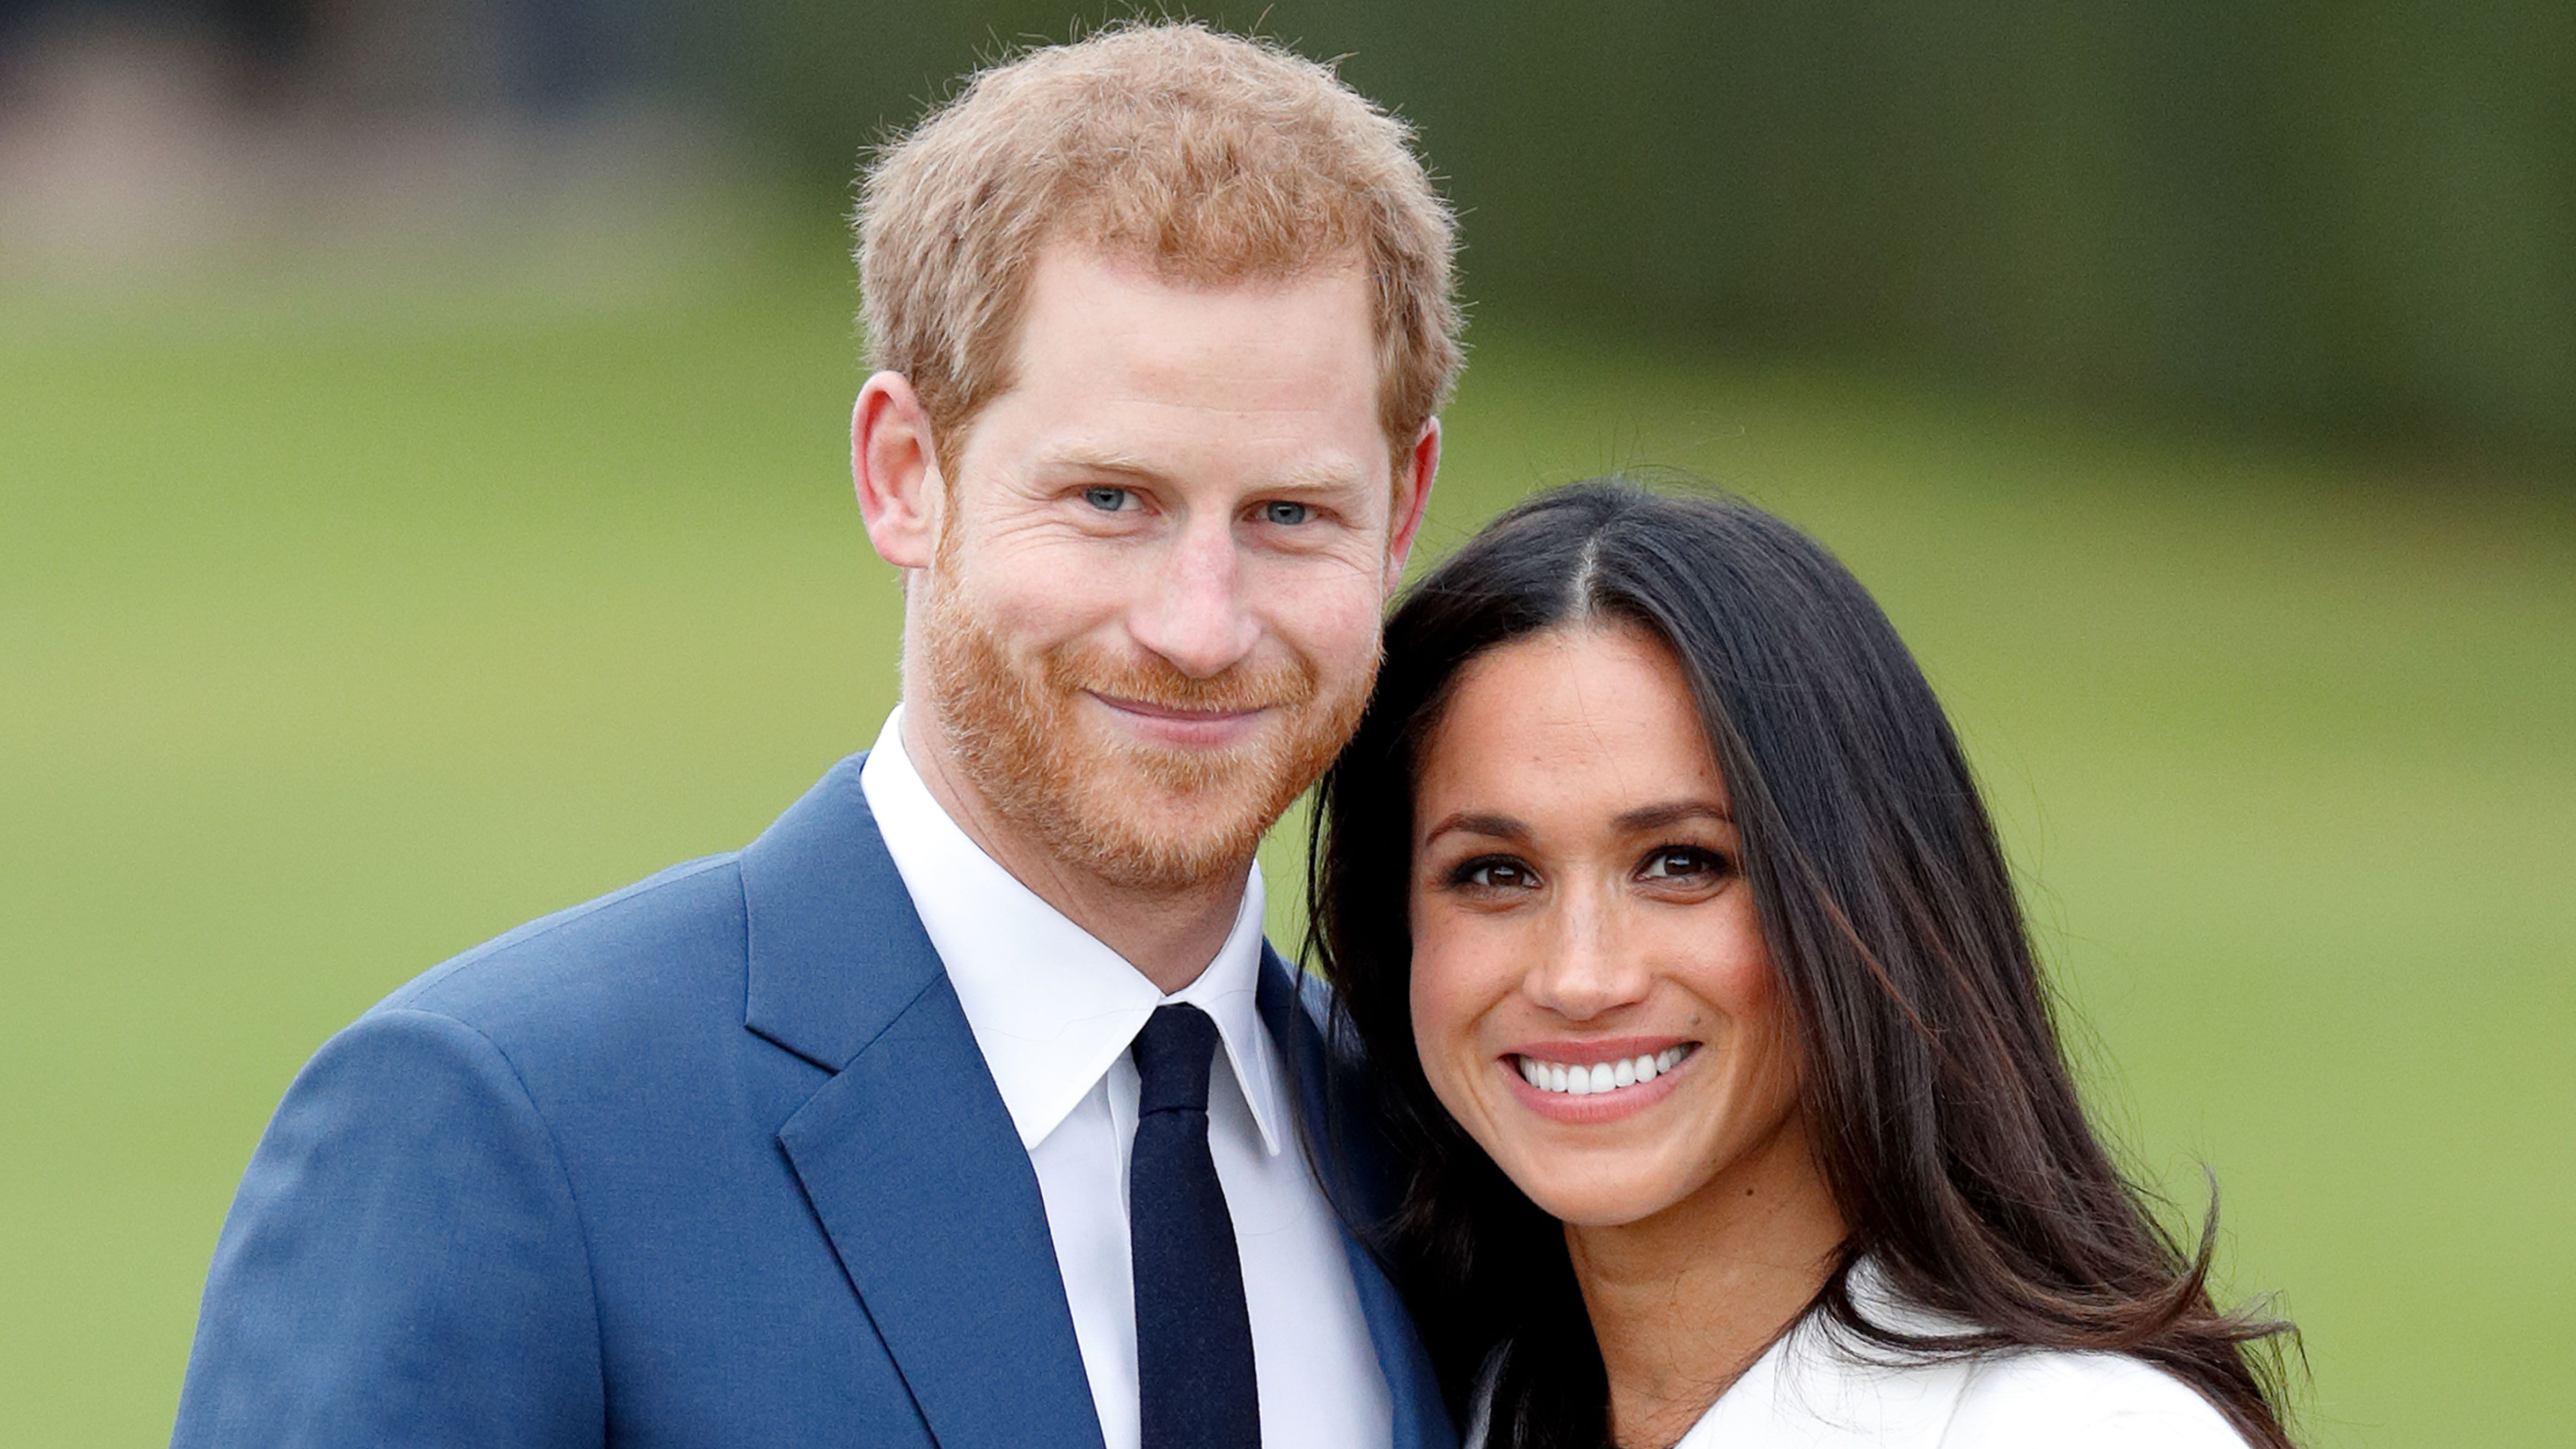 the royal wedding e channelimage